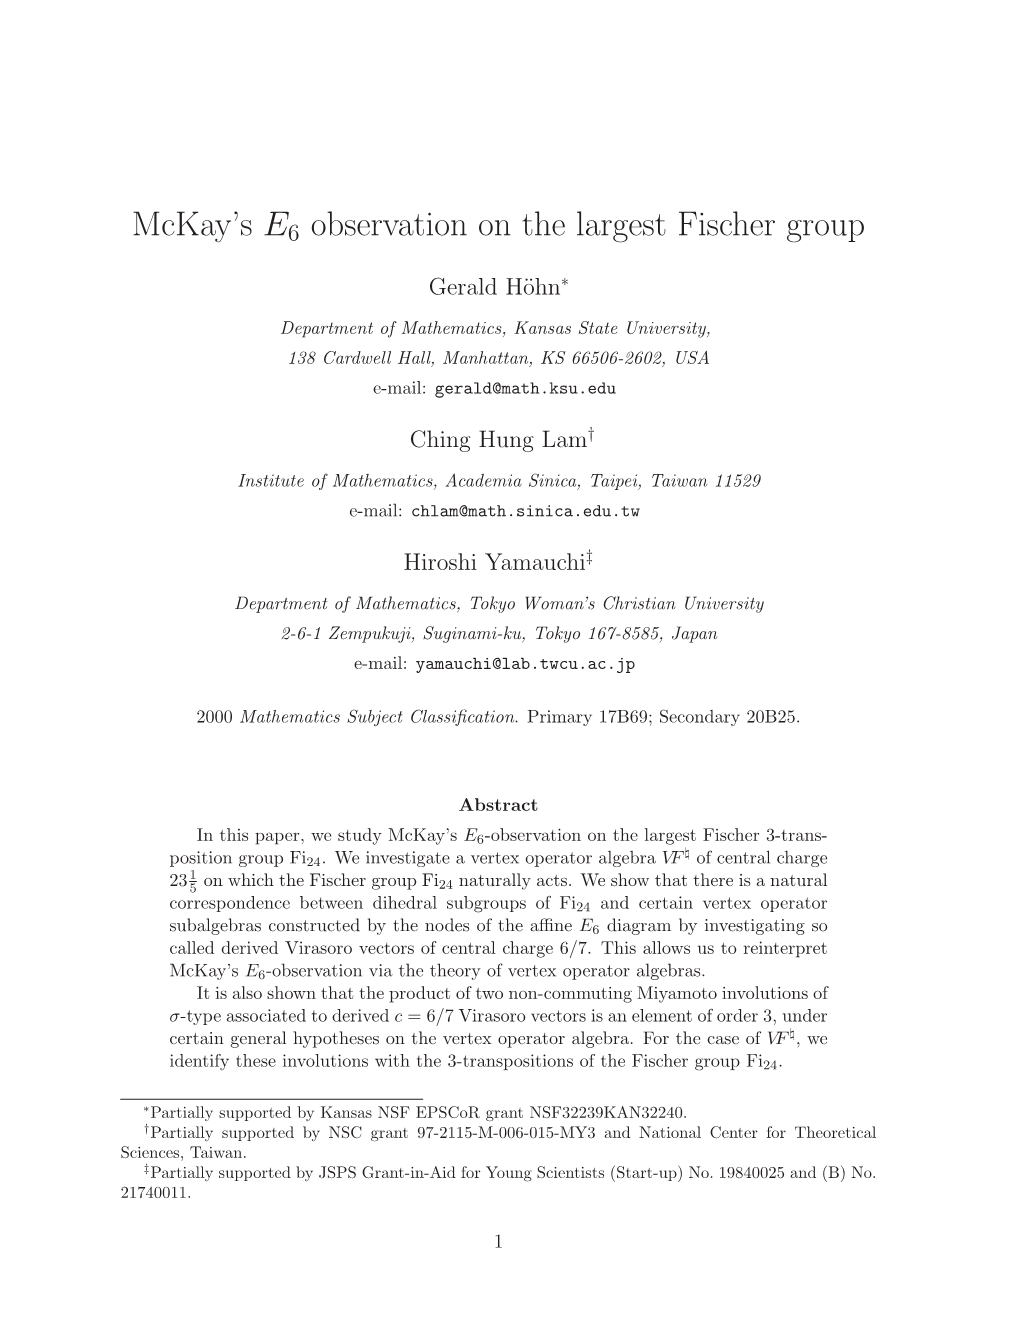 Mckay's E6 Observation on the Largest Fischer Group